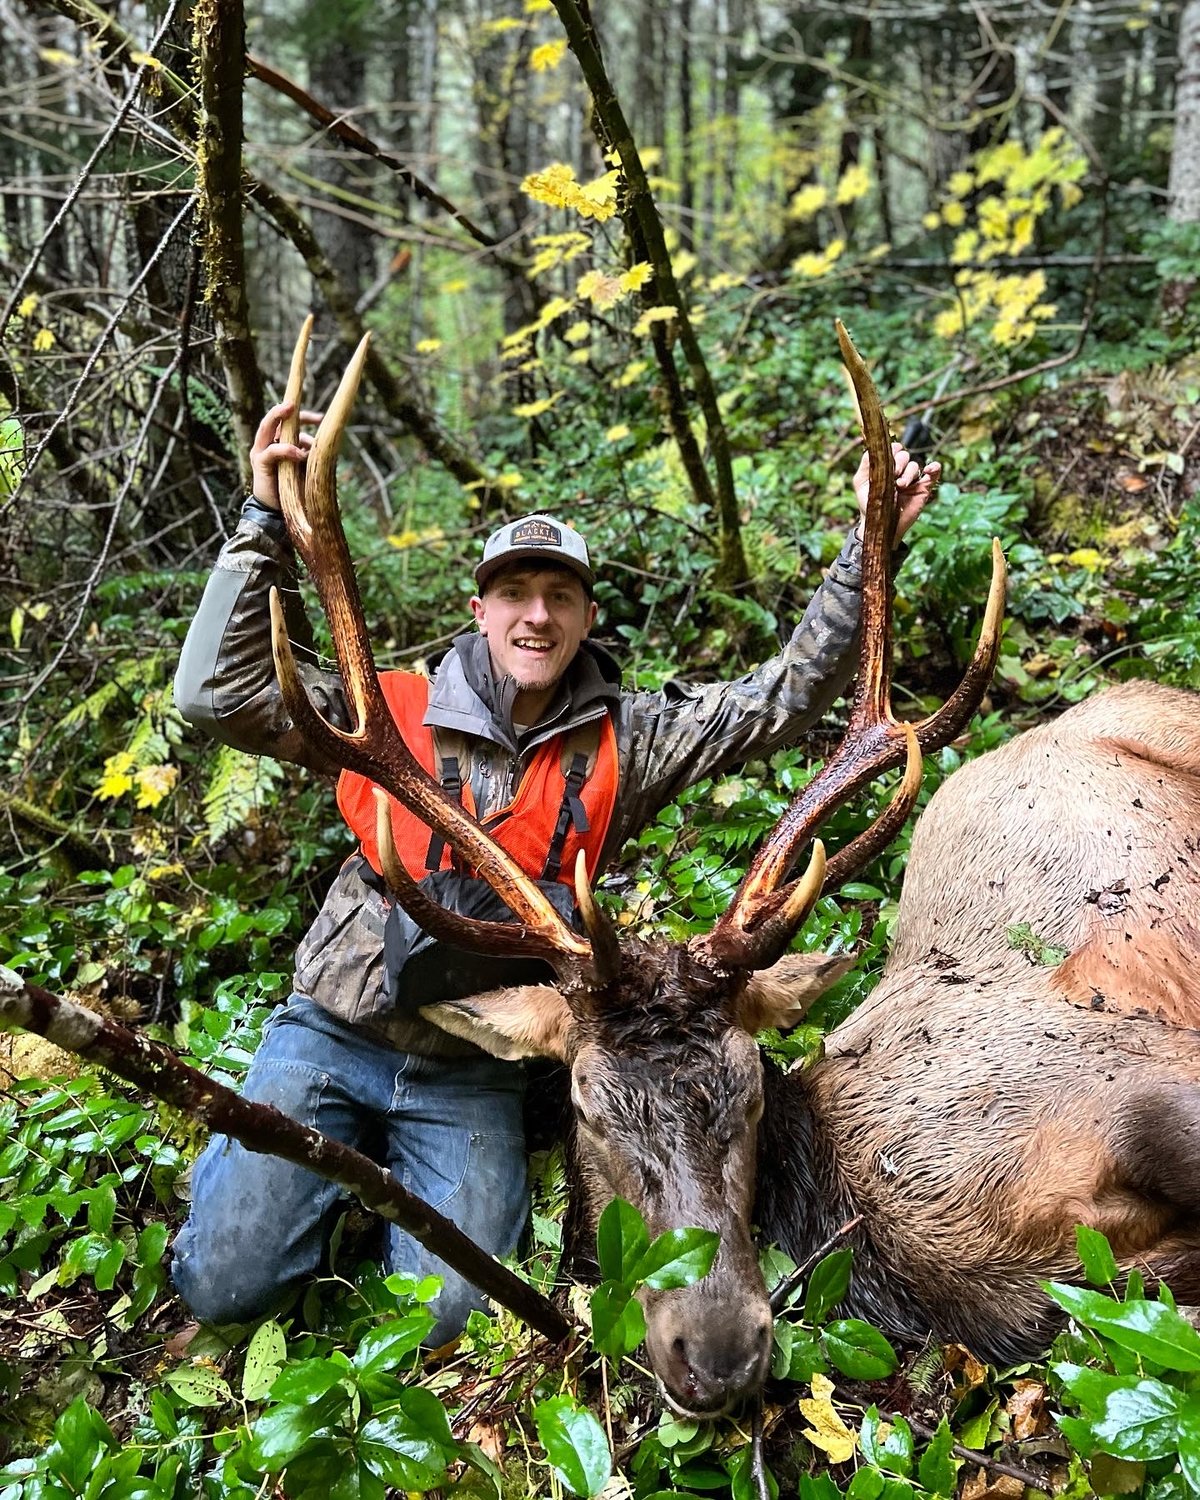 Bryce Lyon harvested this bull elk Saturday, Nov. 5. “Opening morning of modern firearm elk. My dad and father-in-law dropped me off on an old skid road. It’s about a 300-yard walk. I made it halfway when I looked up and saw this guy standing about 125 yards away from me. I pulled up my scope and saw that it was a legal bull. I dropped to one knee and fired a shot out of my 300 RUM. The bull humped up and started running. As I was reloading my rifle, I heard him crashing through the trees. The bull made it 65 yards from where he stood. This was my 13th elk season and this is my first elk. I am beyond blessed to have harvested such a beautiful animal. I harvested this bull in Southwest Washington. (Sorry not willing to give up my location.)” The Chronicle is publishing photos and details of local hunting and fishing outings in every Thursday edition. To be included, send photos and information to news@chronline.com.